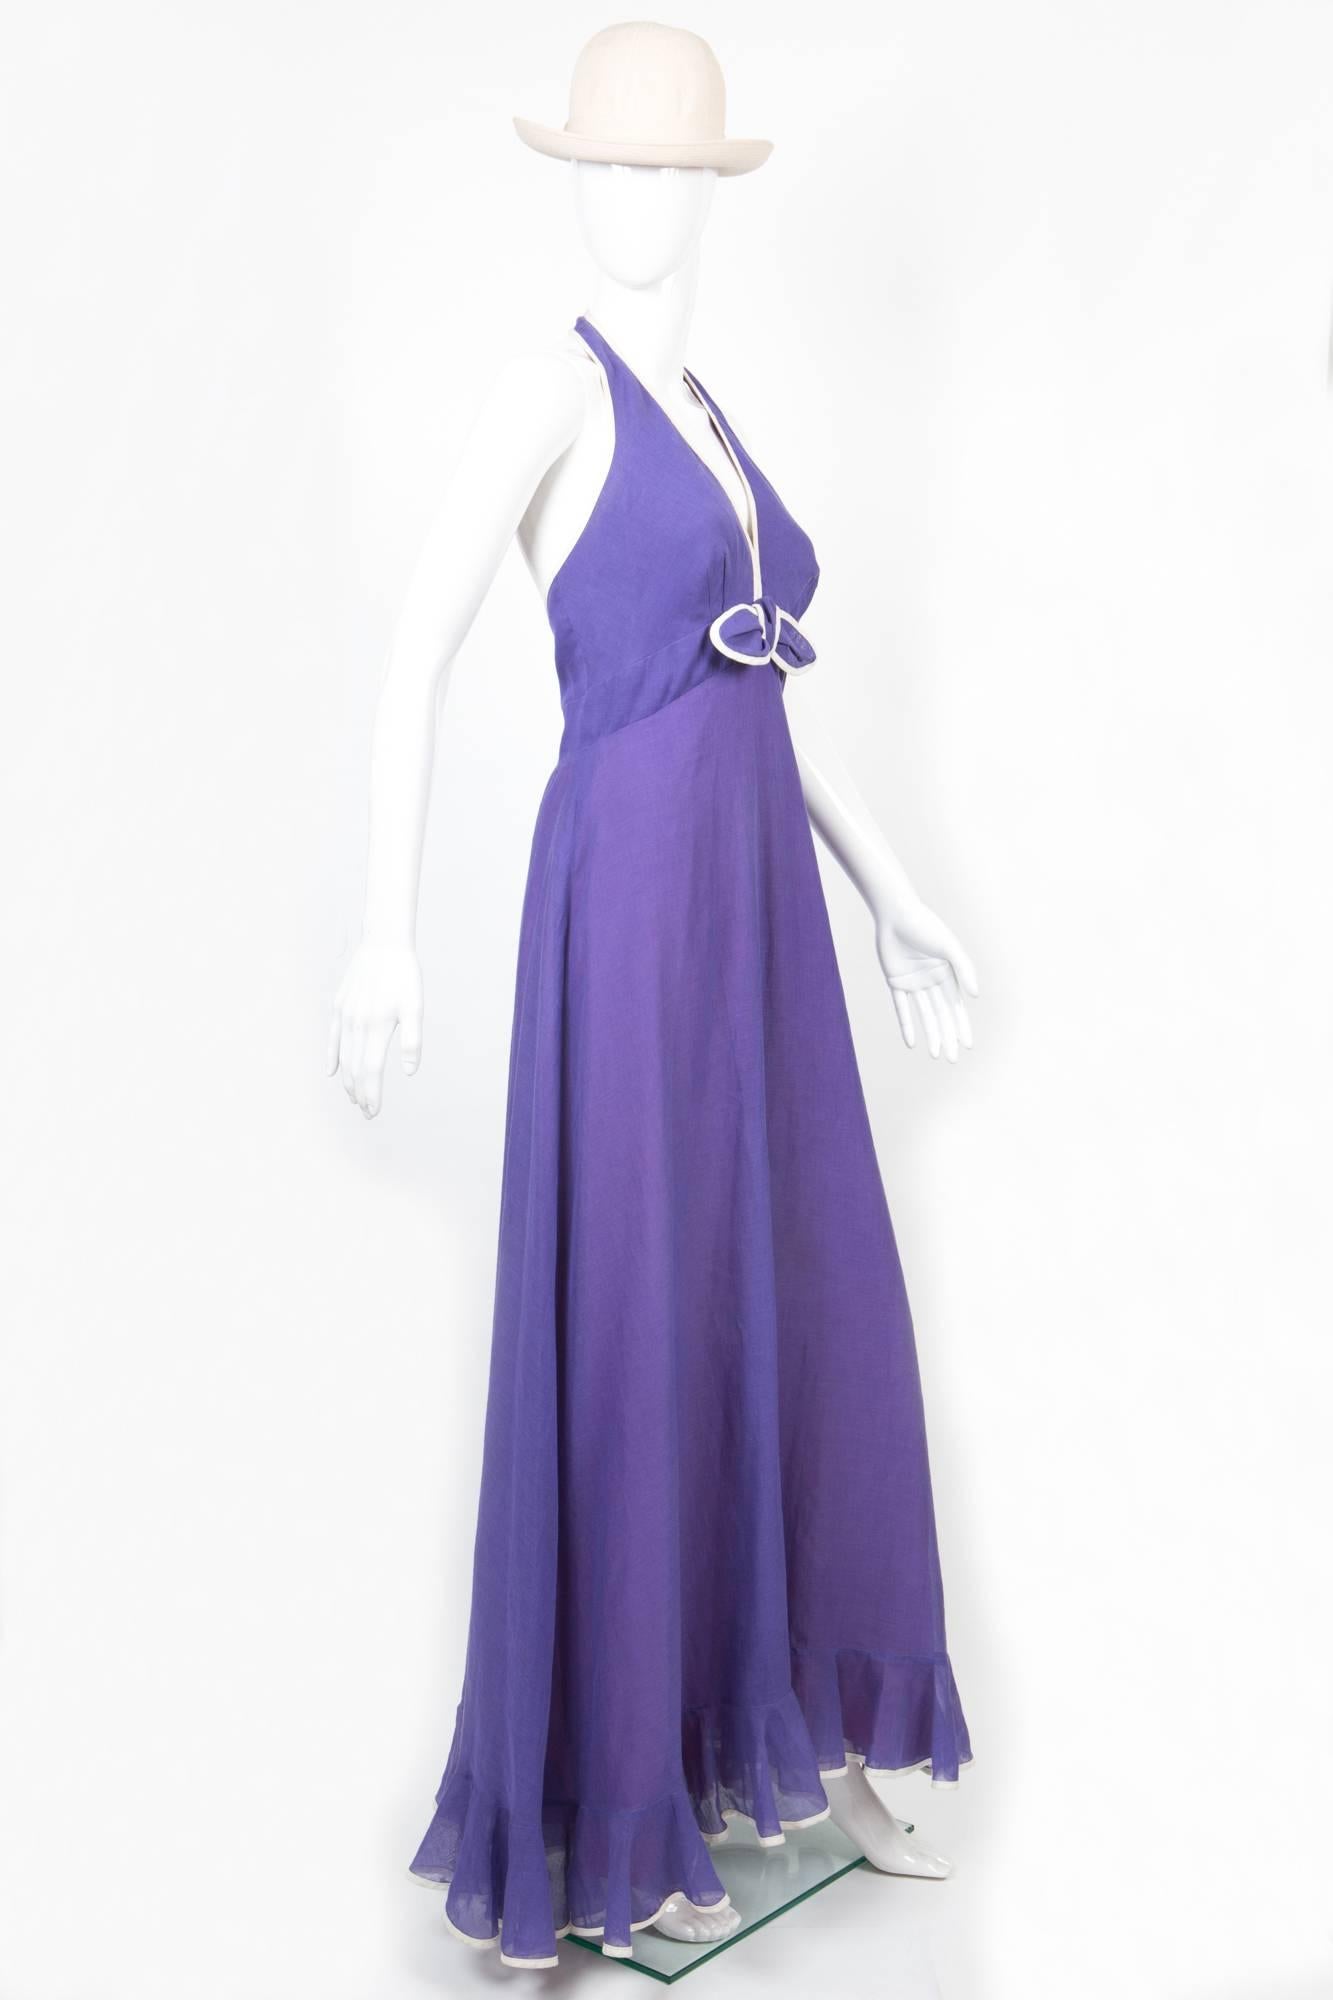 Fantastic 1972 ELLIETTE LEWIS (Miss Elliette) thin cotton voile purple dress featuring an off white piping, a center back zip with a center back button. worn by  Sandra Smith in Columbo The Greenhouse Jungle Season 2 episode 2 ( see attached